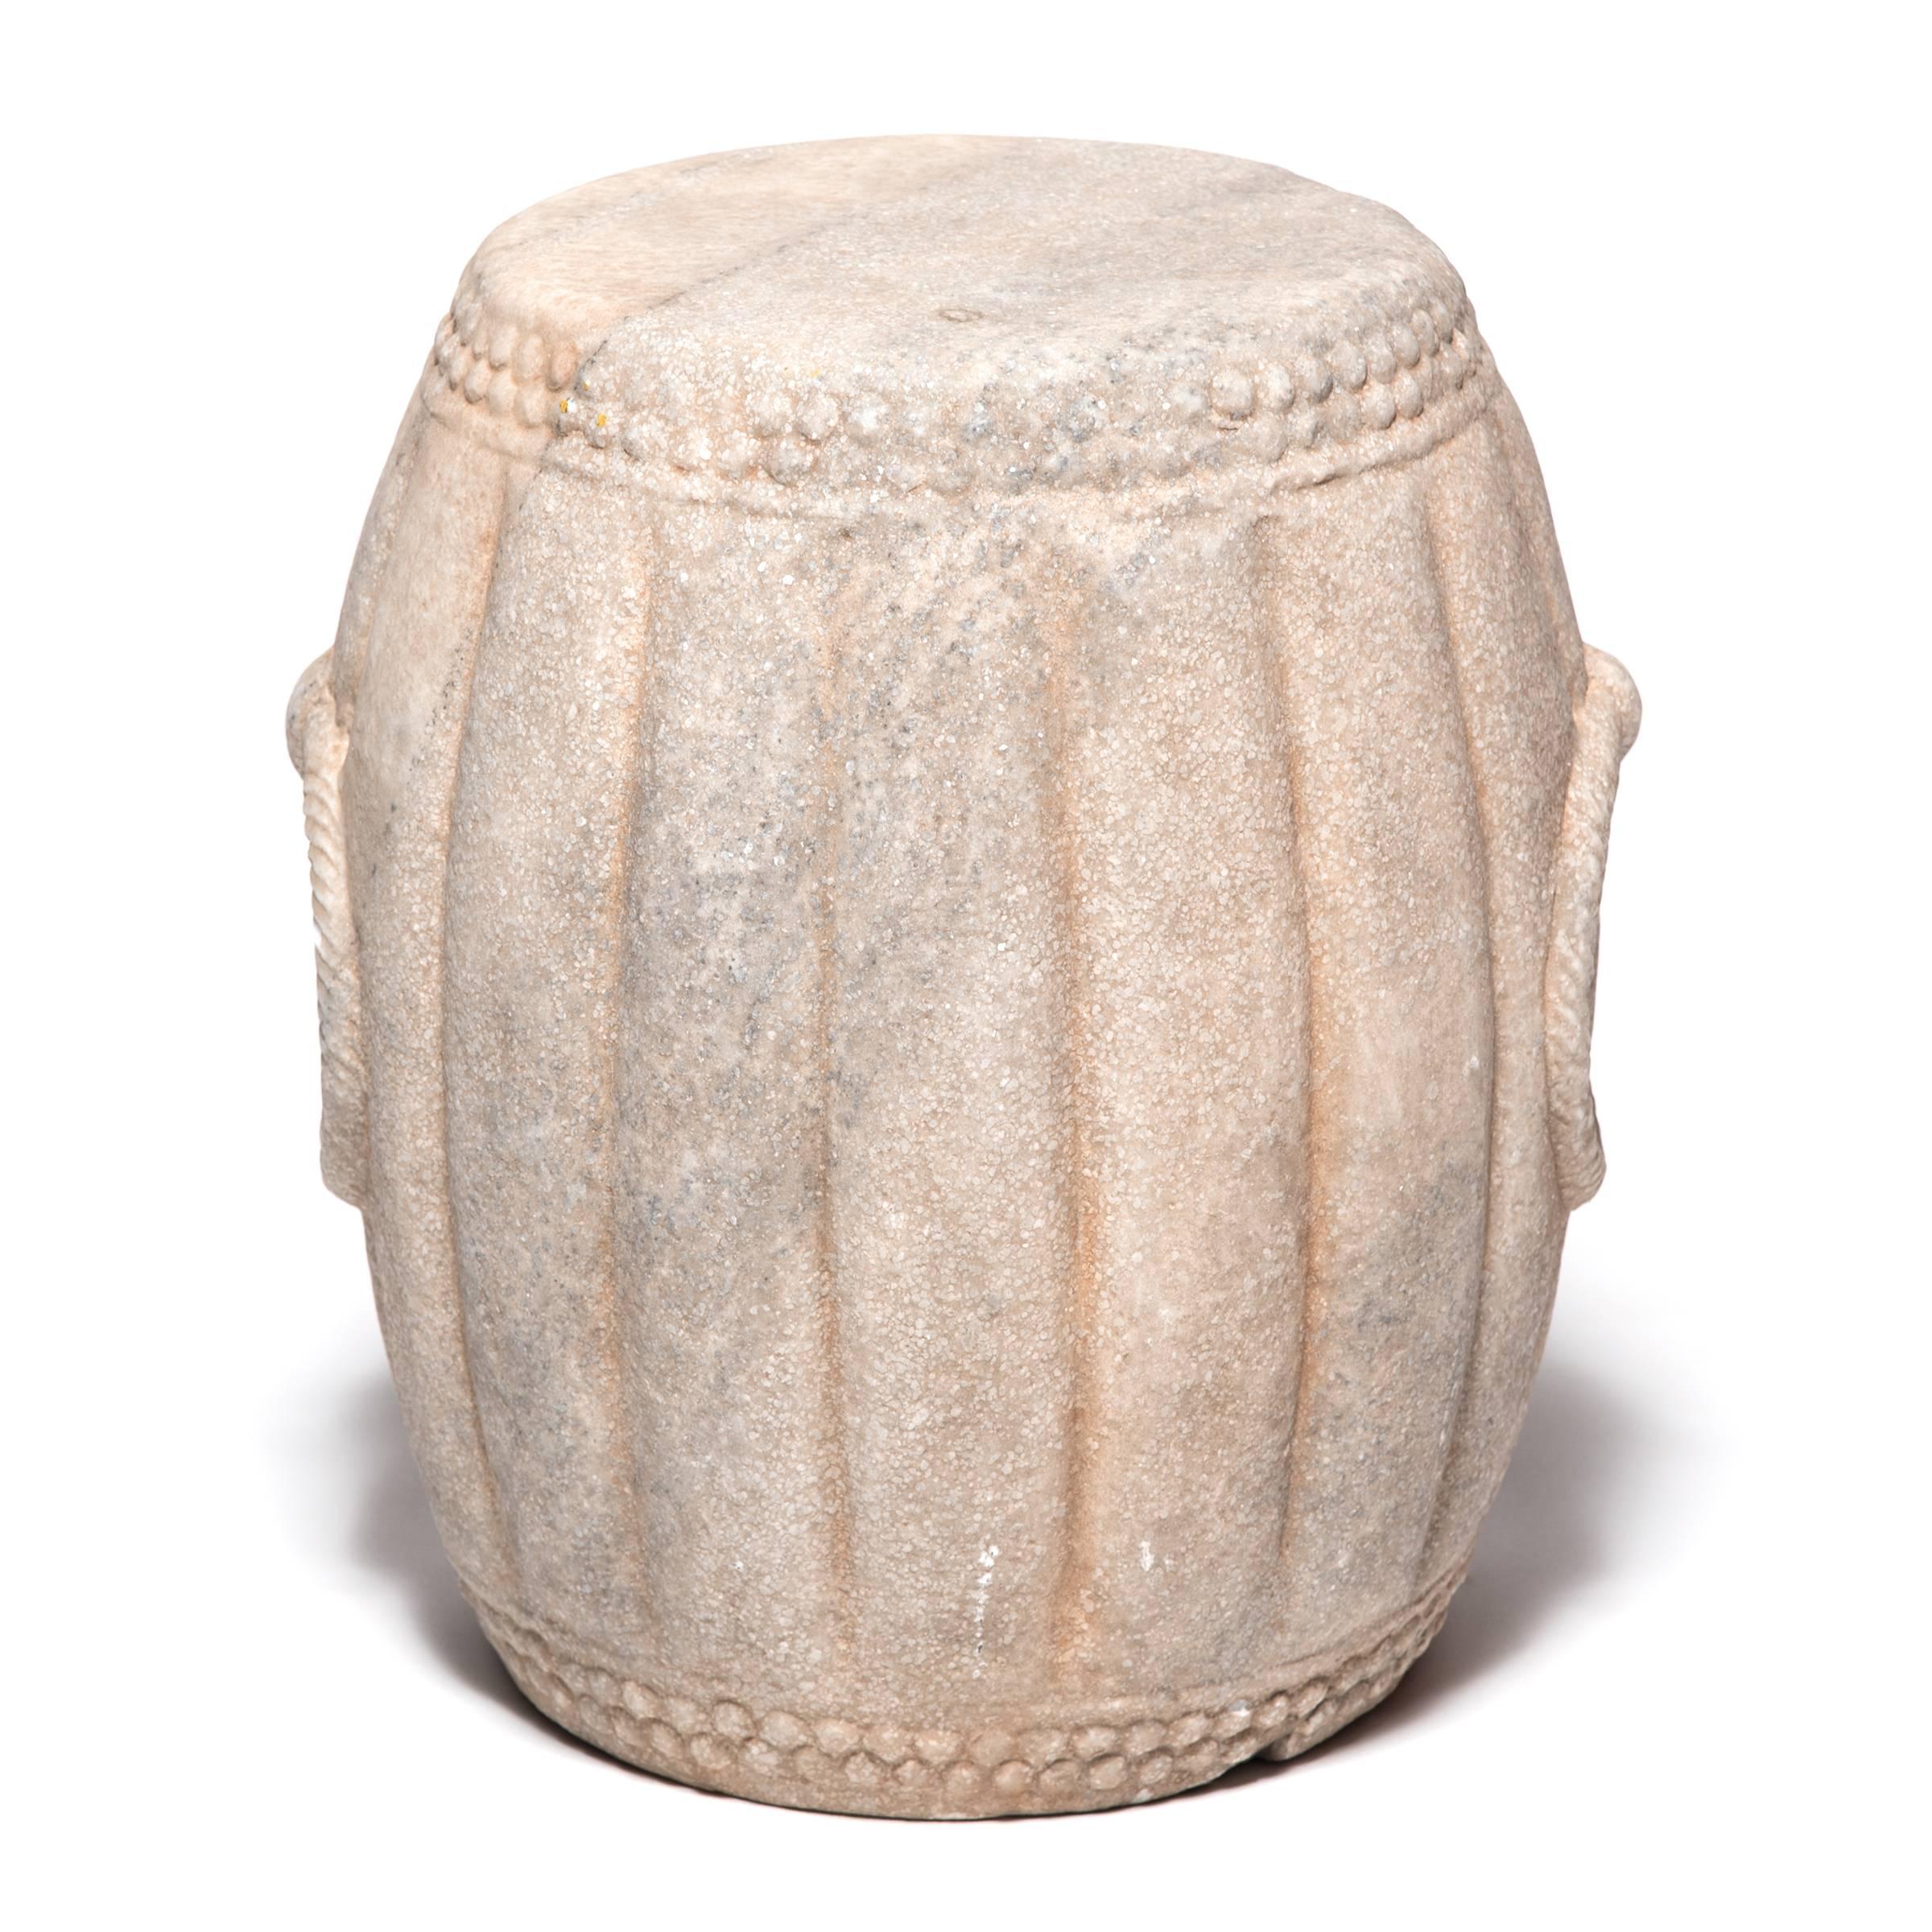 Hand-carved of marble, this drum-shaped stool swells a ribbed melon shape, an ancient symbol of fertility. The artist used a hobnail-like texture on either end to suggest the rivets that fastened the drum's stretched skin head and included